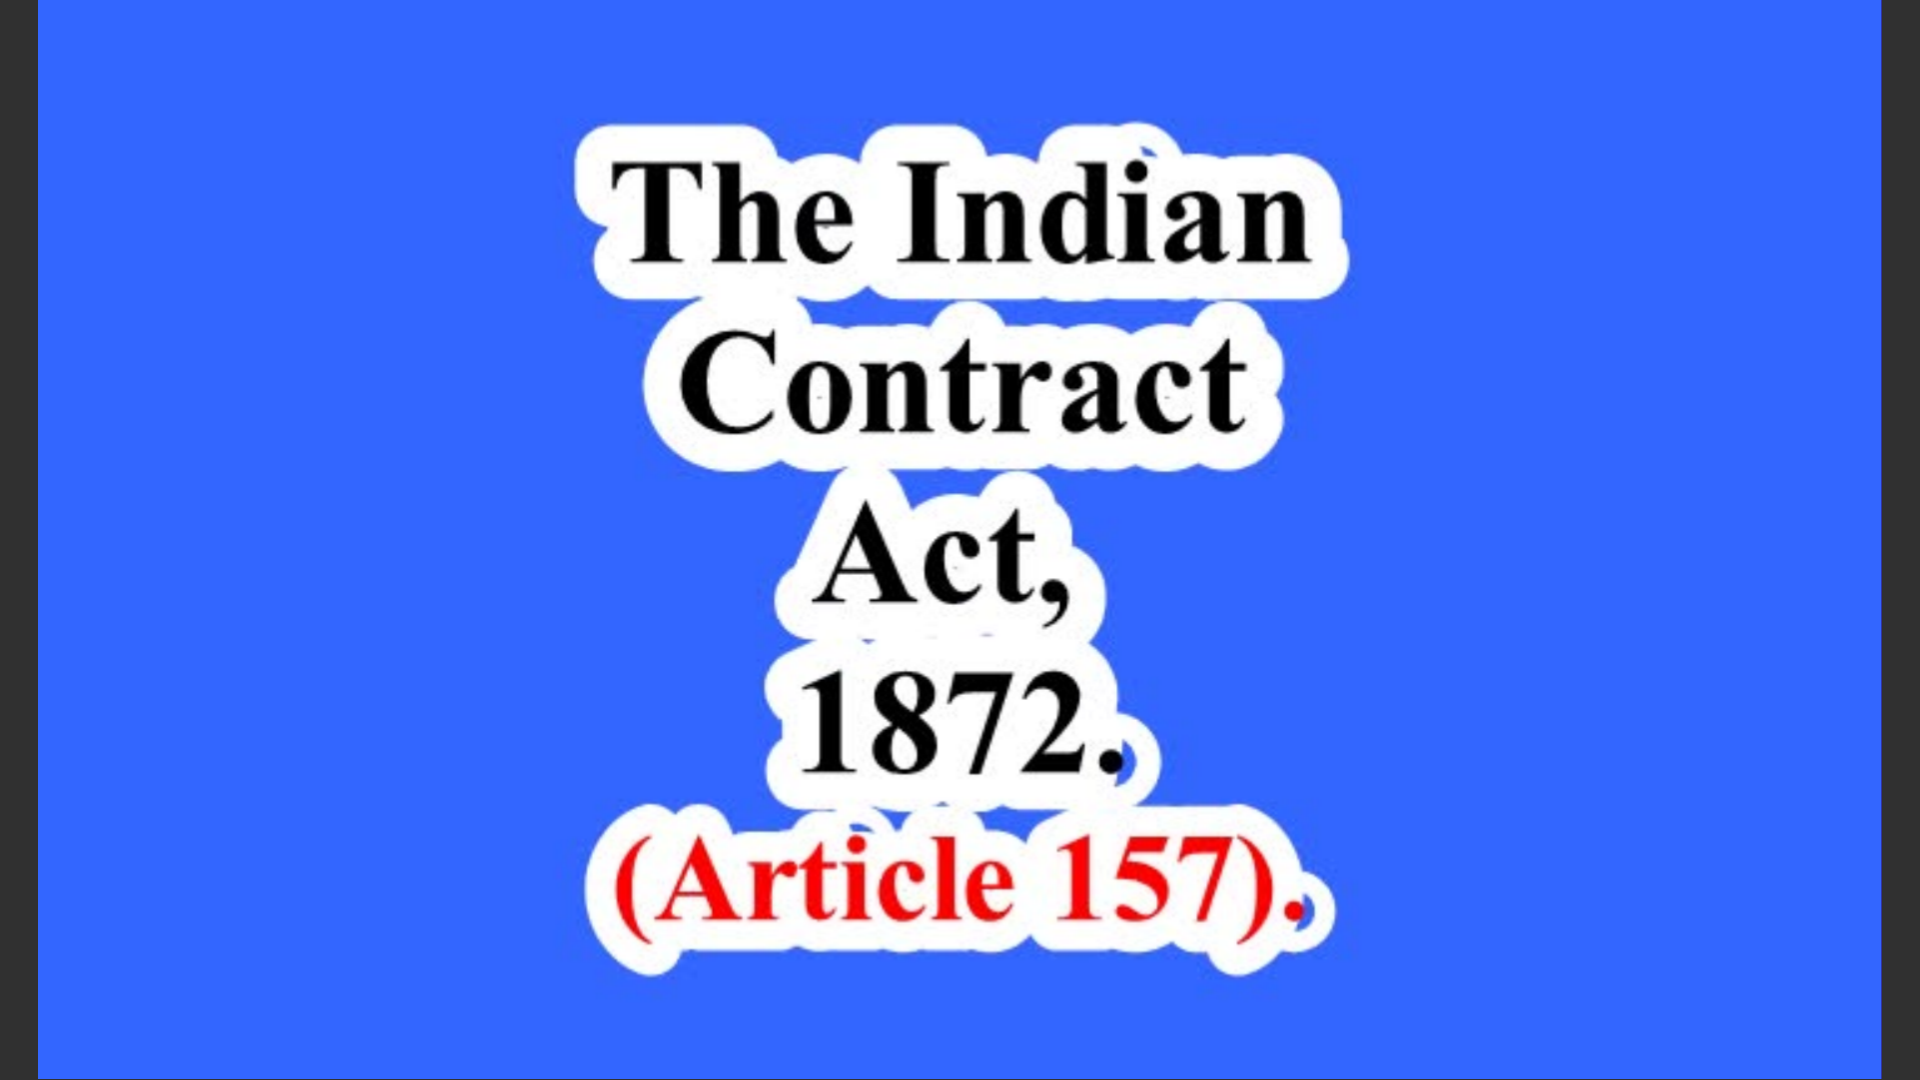 The Indian Contract Act, 1872. (Article 157).